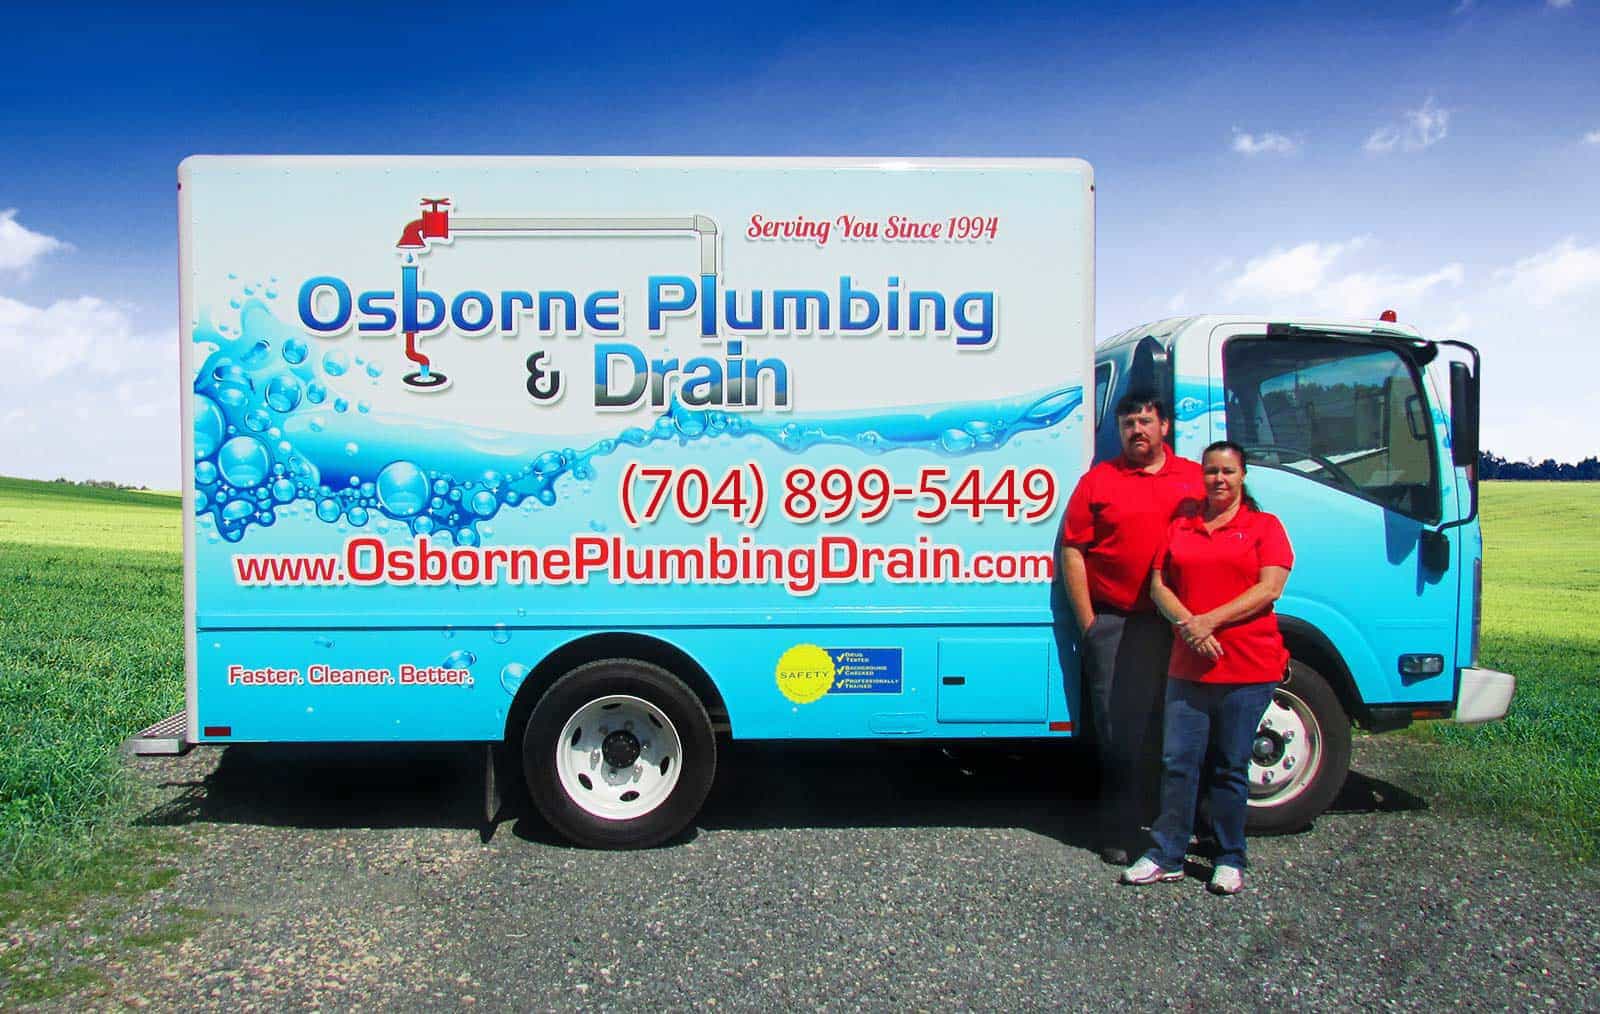 About Us lets our future clients learn what separates Osborne Plumbing from the other competitors. Located in Charlotte NC, Just pass Gastonia NC.